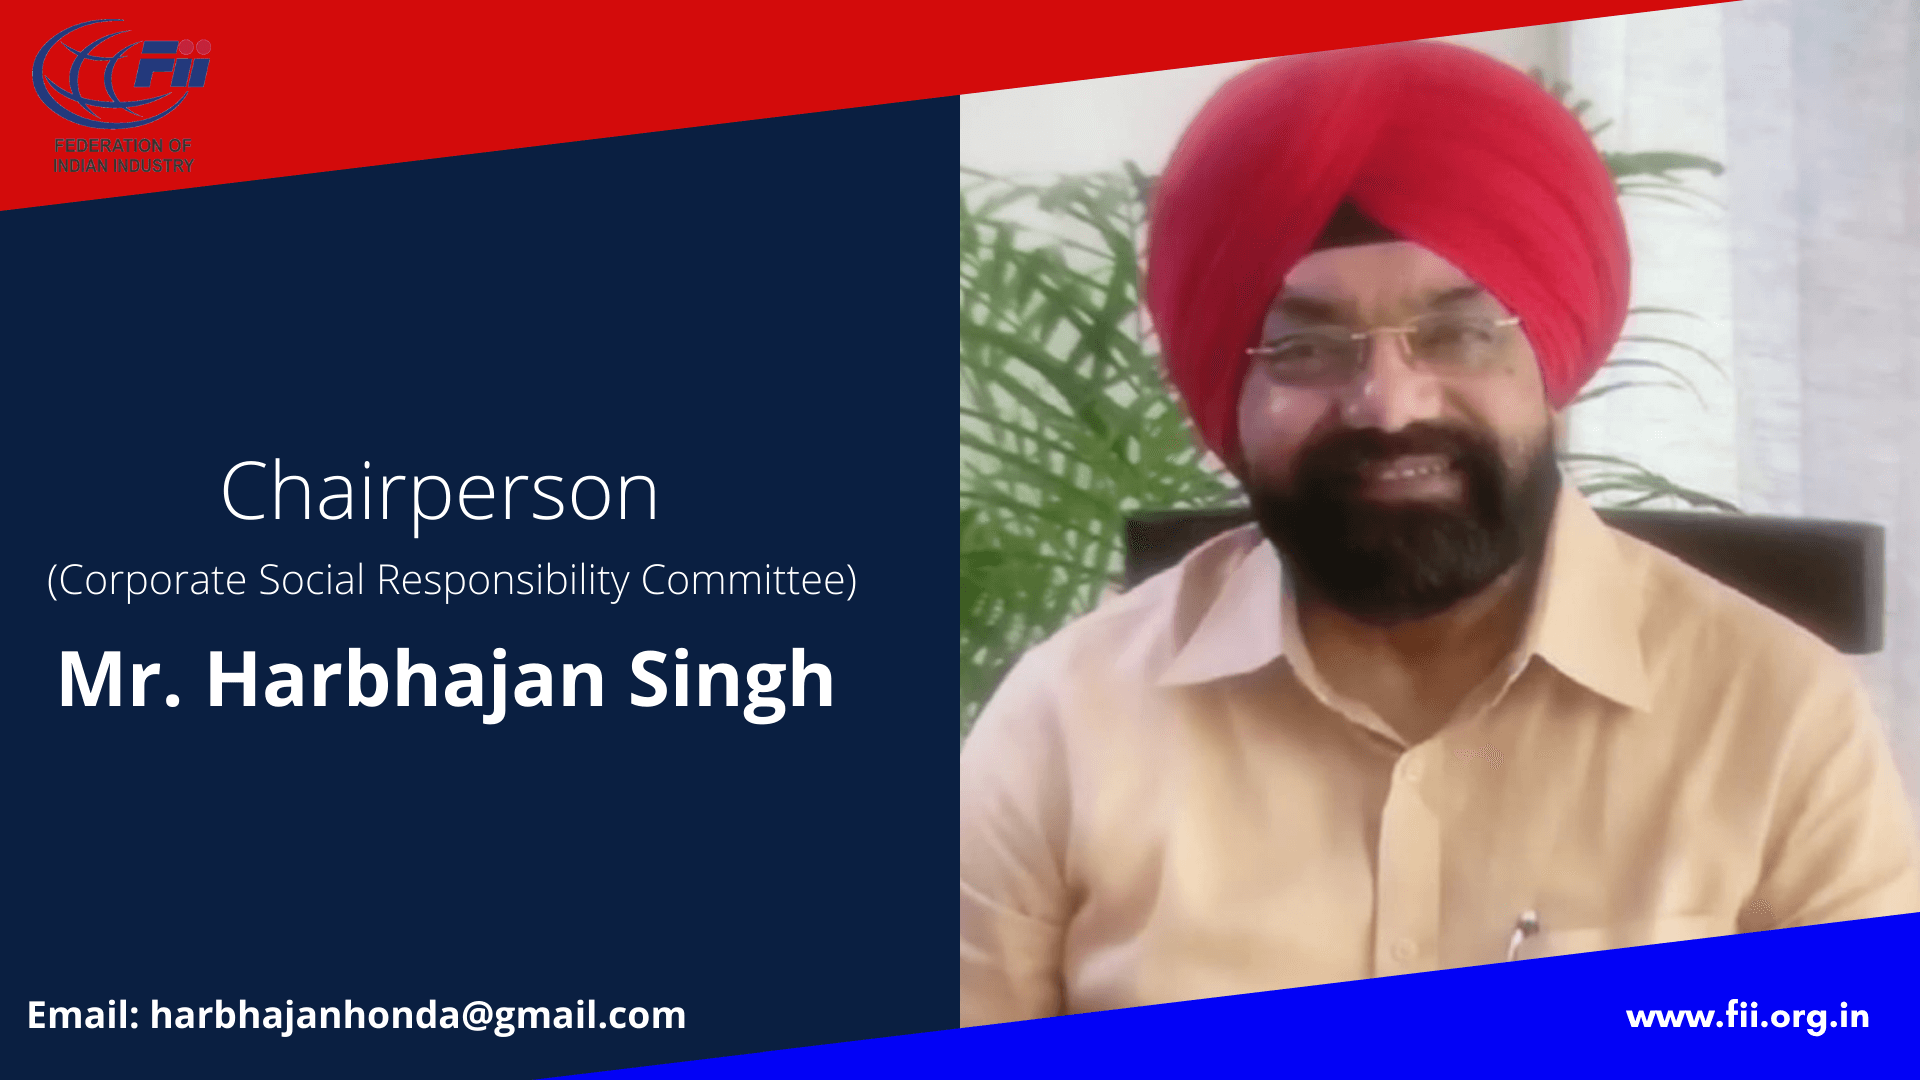 Mr. Harbhajan Singh, Chairperson, Corporate Social Responsibility Committee